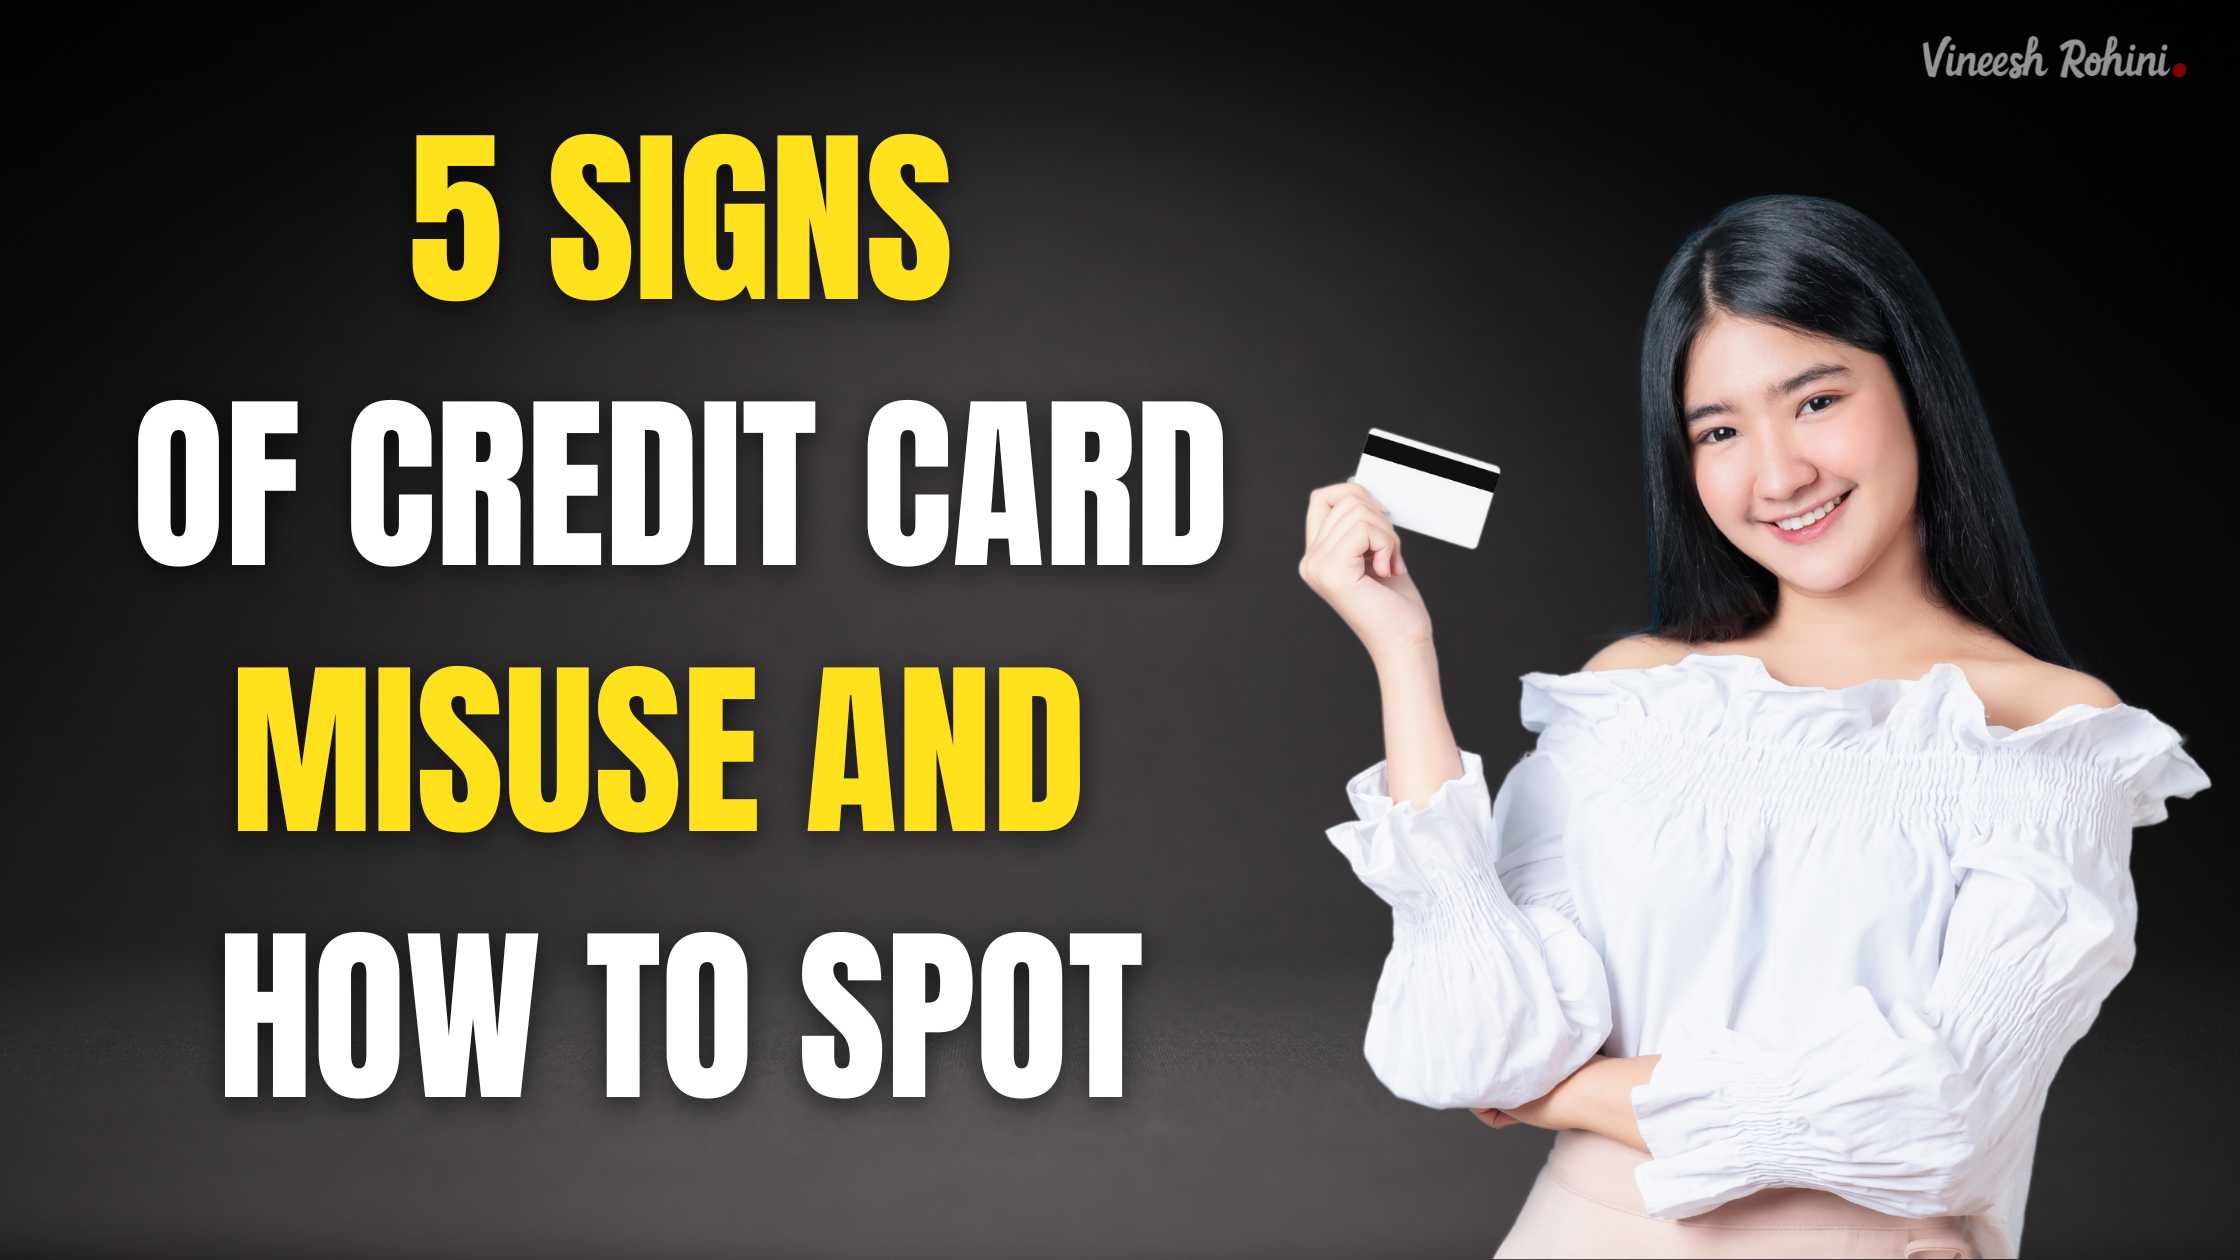 5 Signs of Credit Card Misuse and How to Spot - Vineesh Rohini